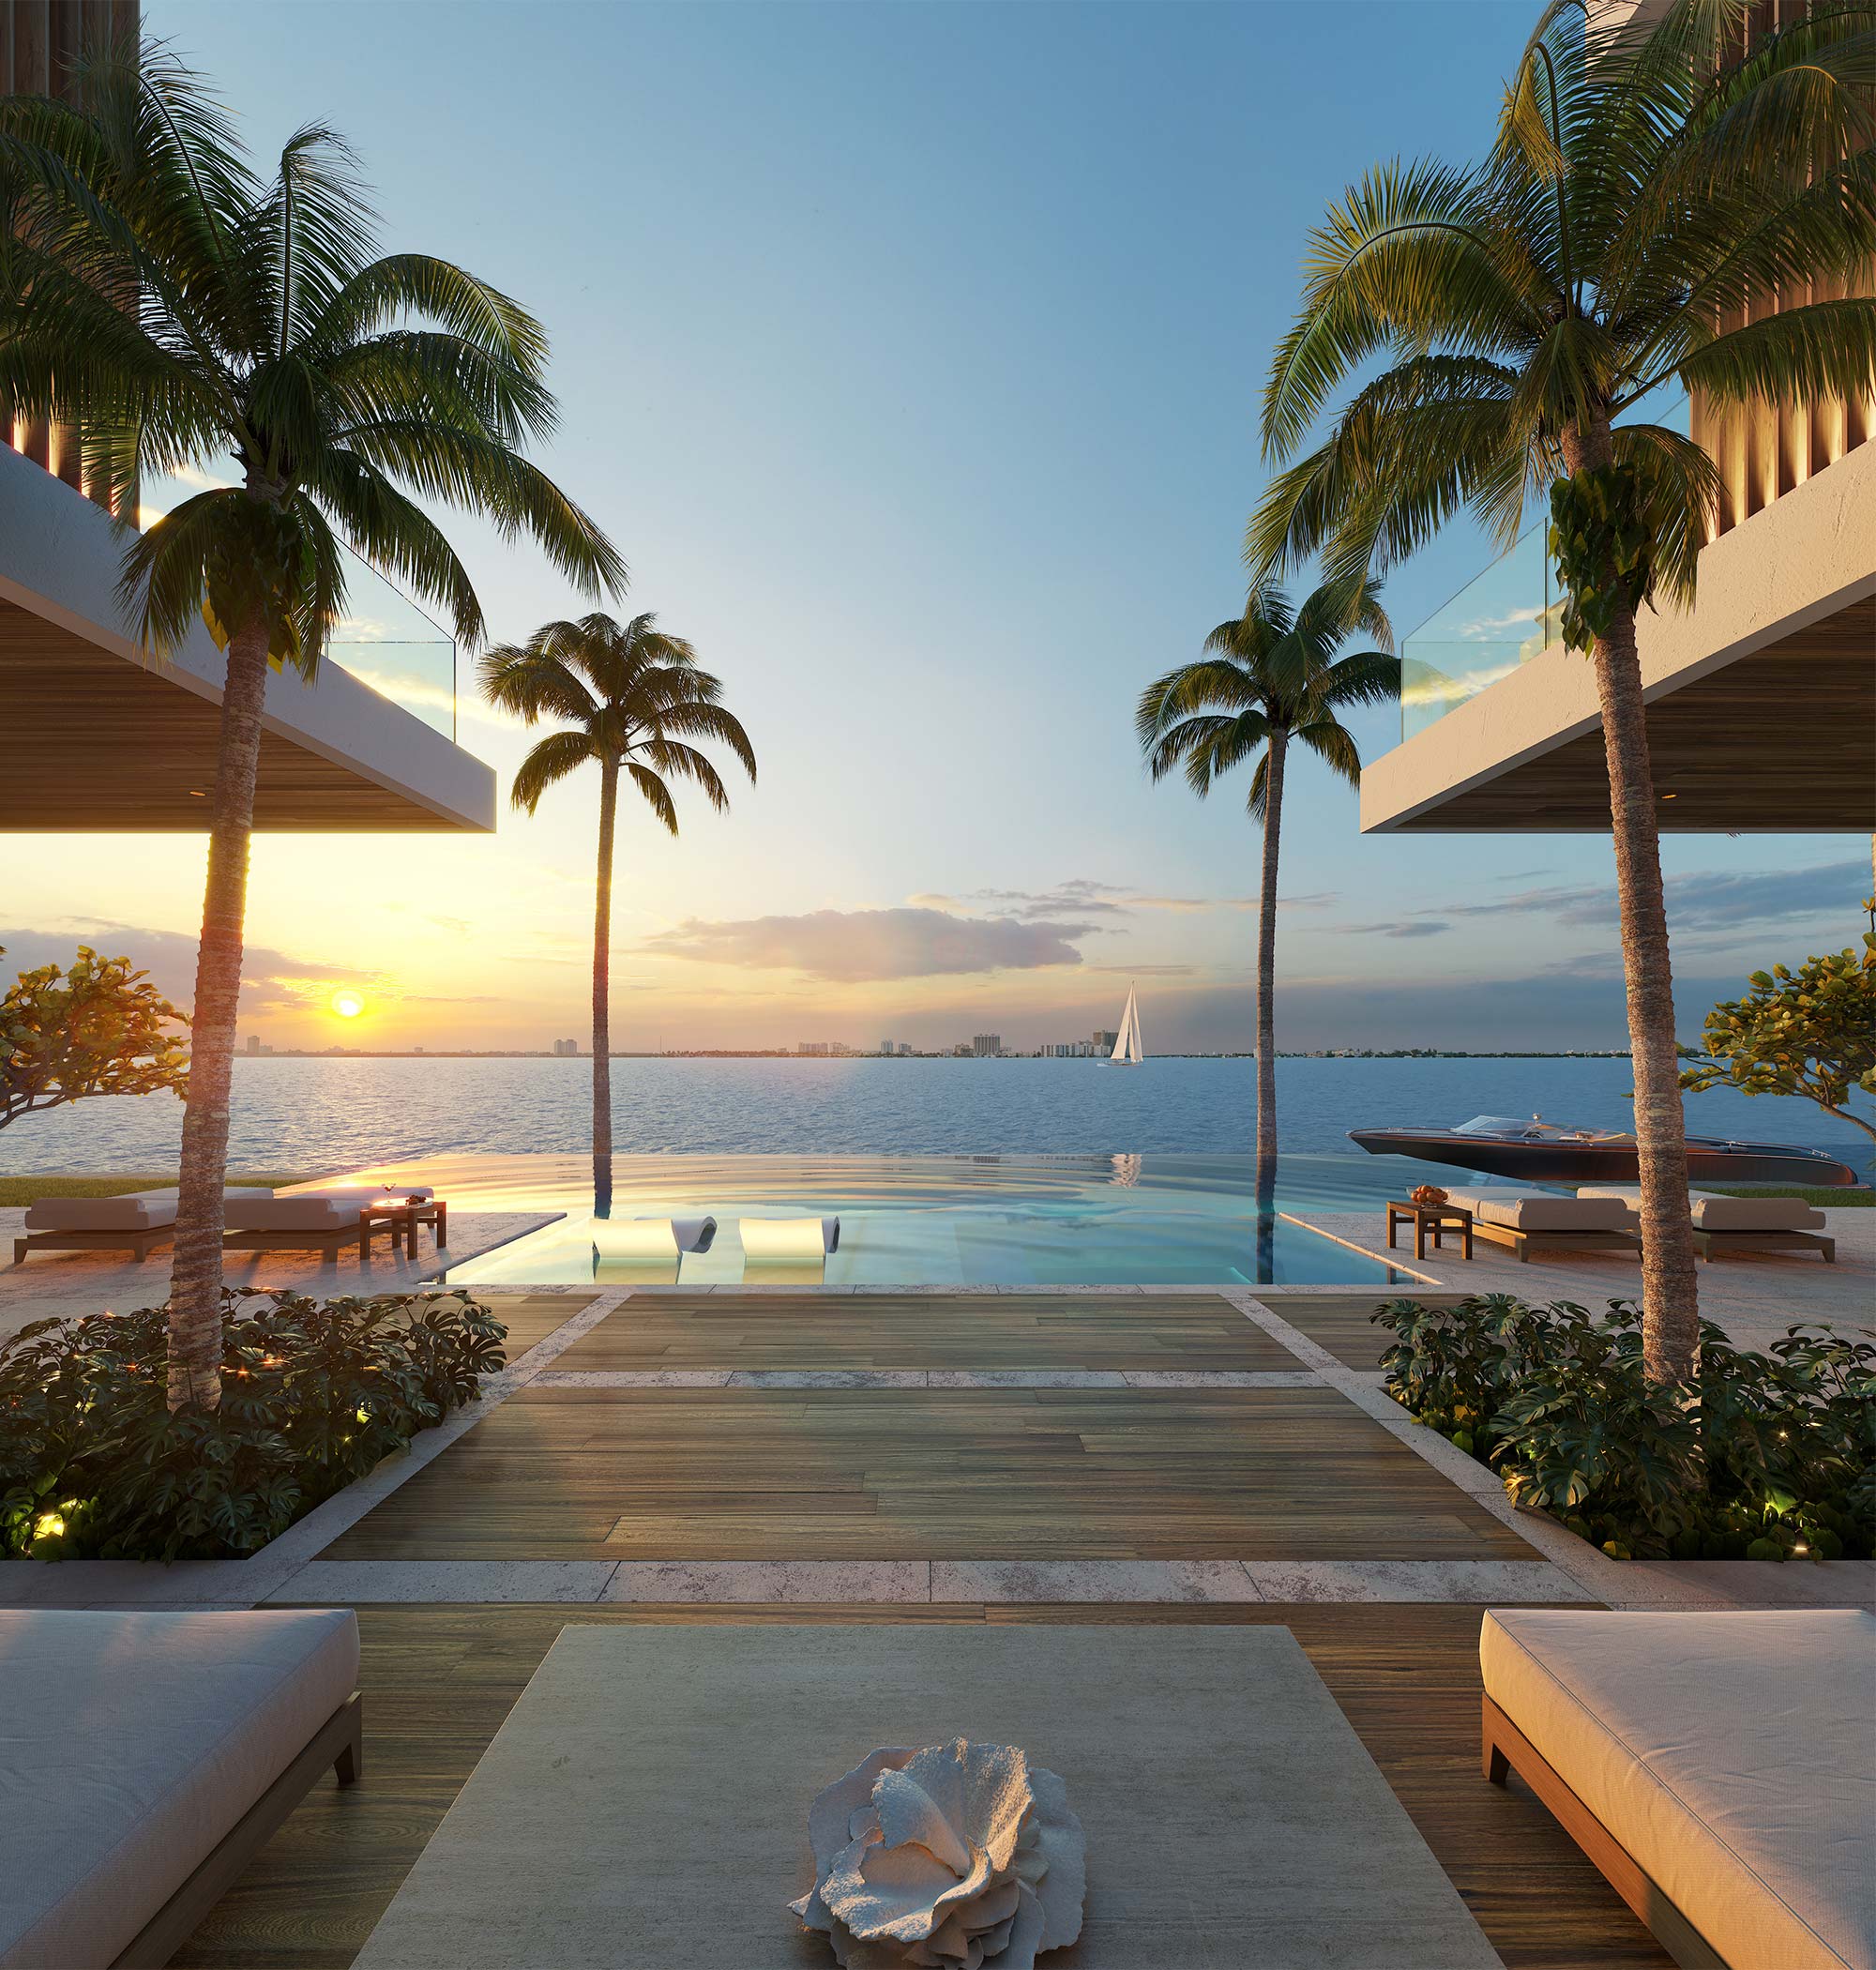 Architectural Rendering of the pool of the North Bay Road project located in Miami